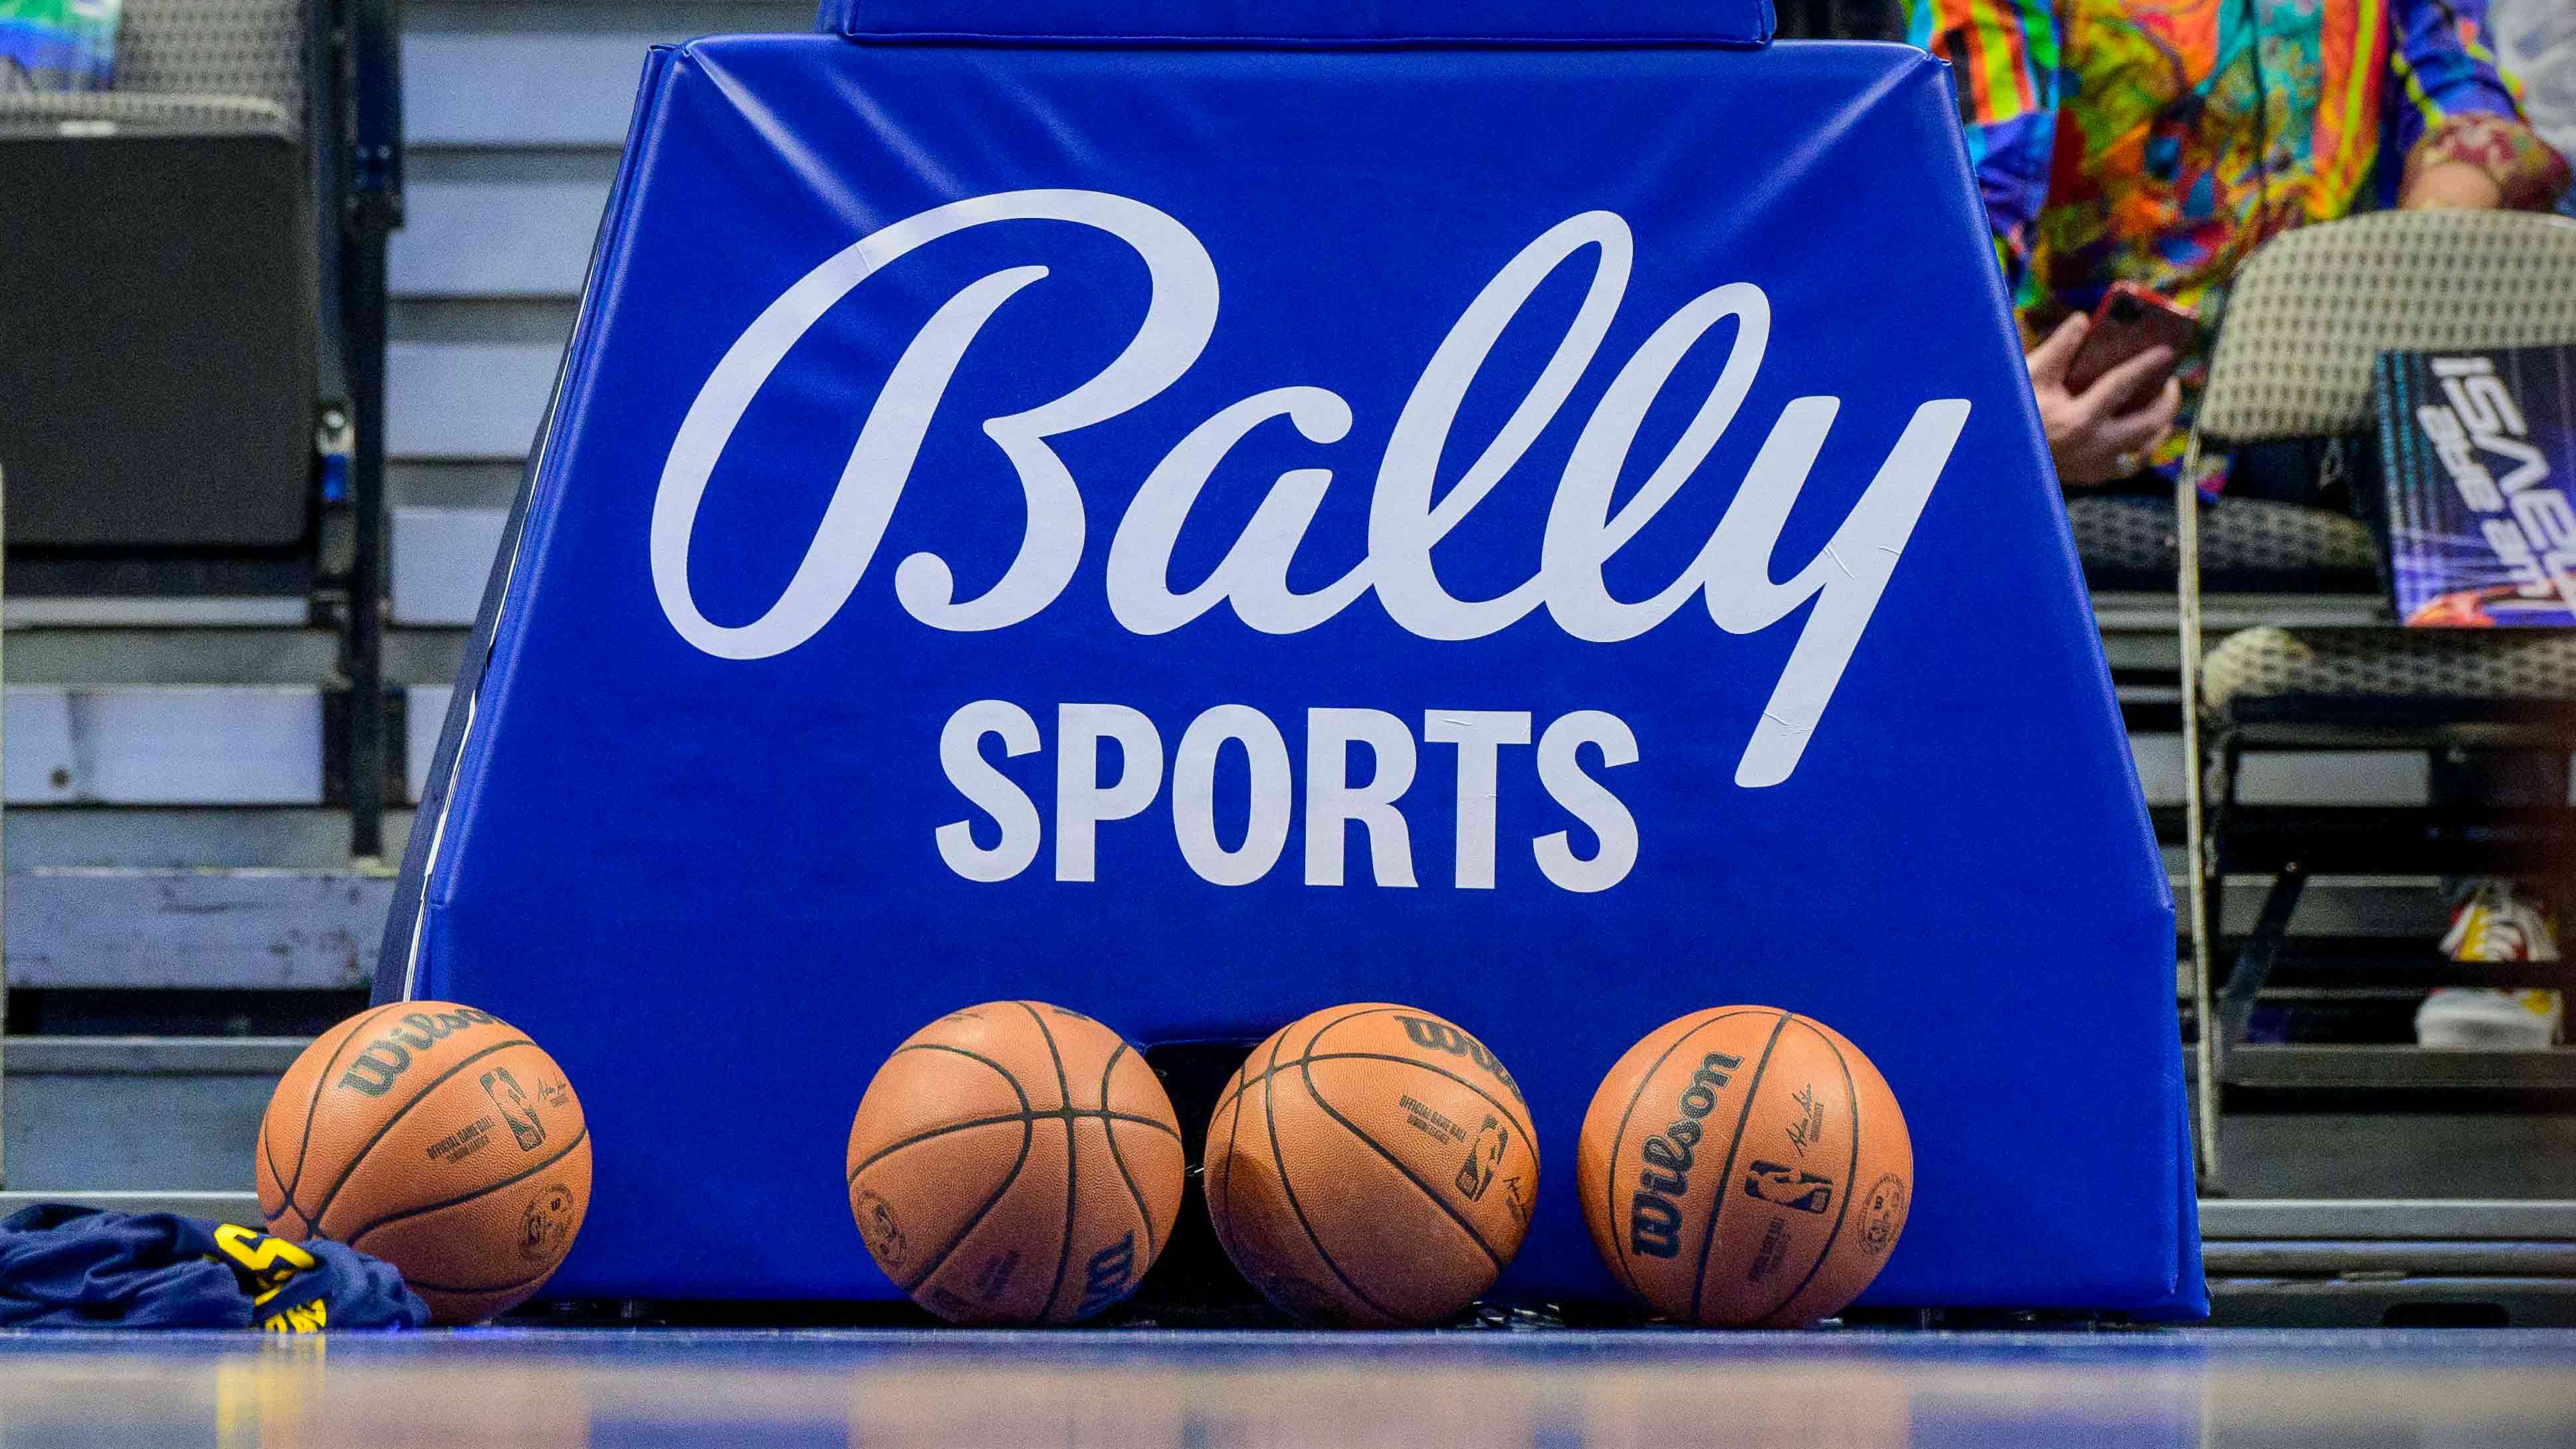 NBA is switching official game ball to Wilson brand - Los Angeles